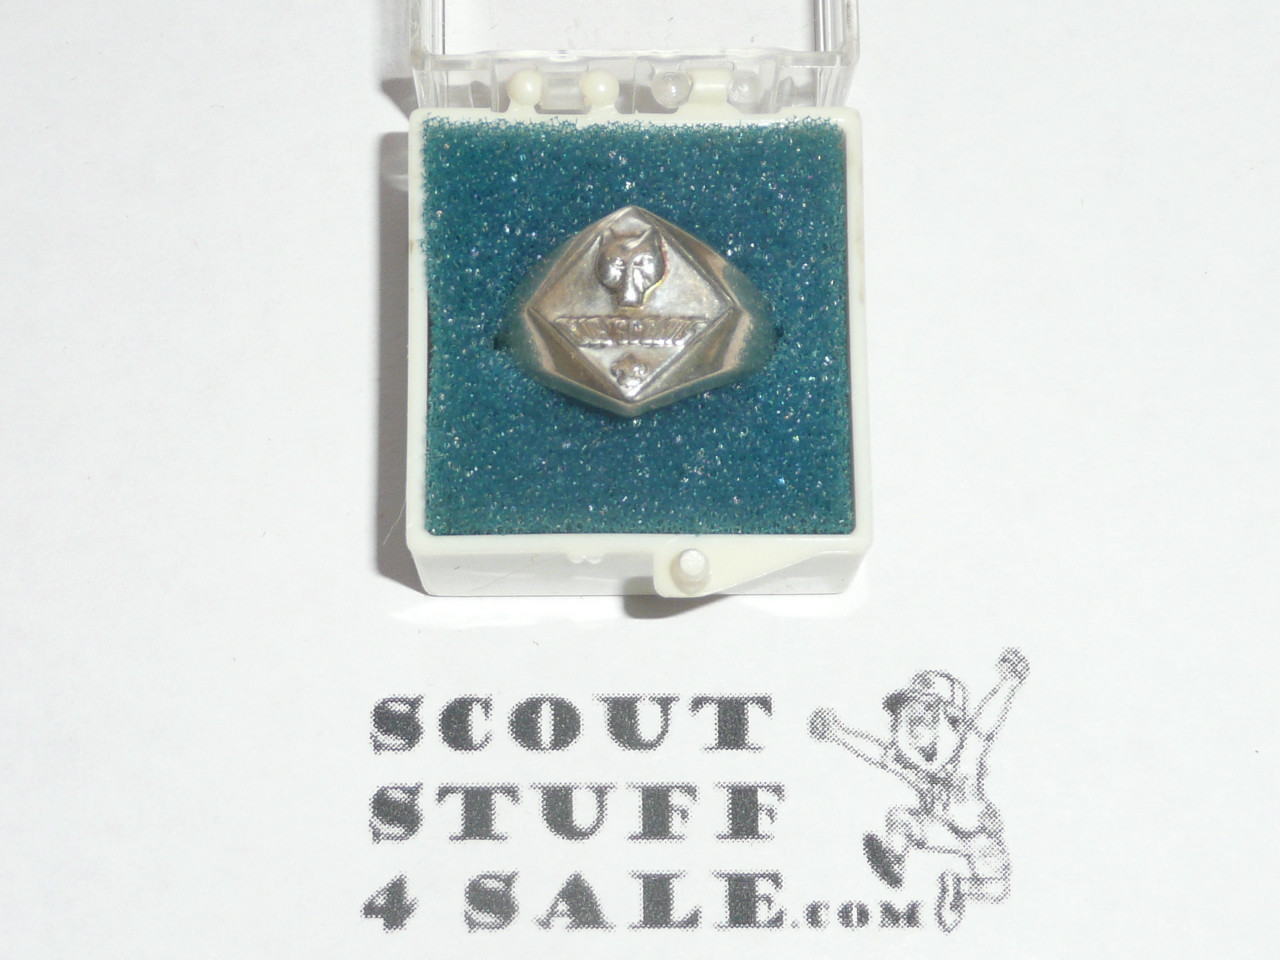 Cub Scout Silver RIng, 1960's, Wolf Emblem "CUB SCOUTS", Sterling Silver, Size Unknown